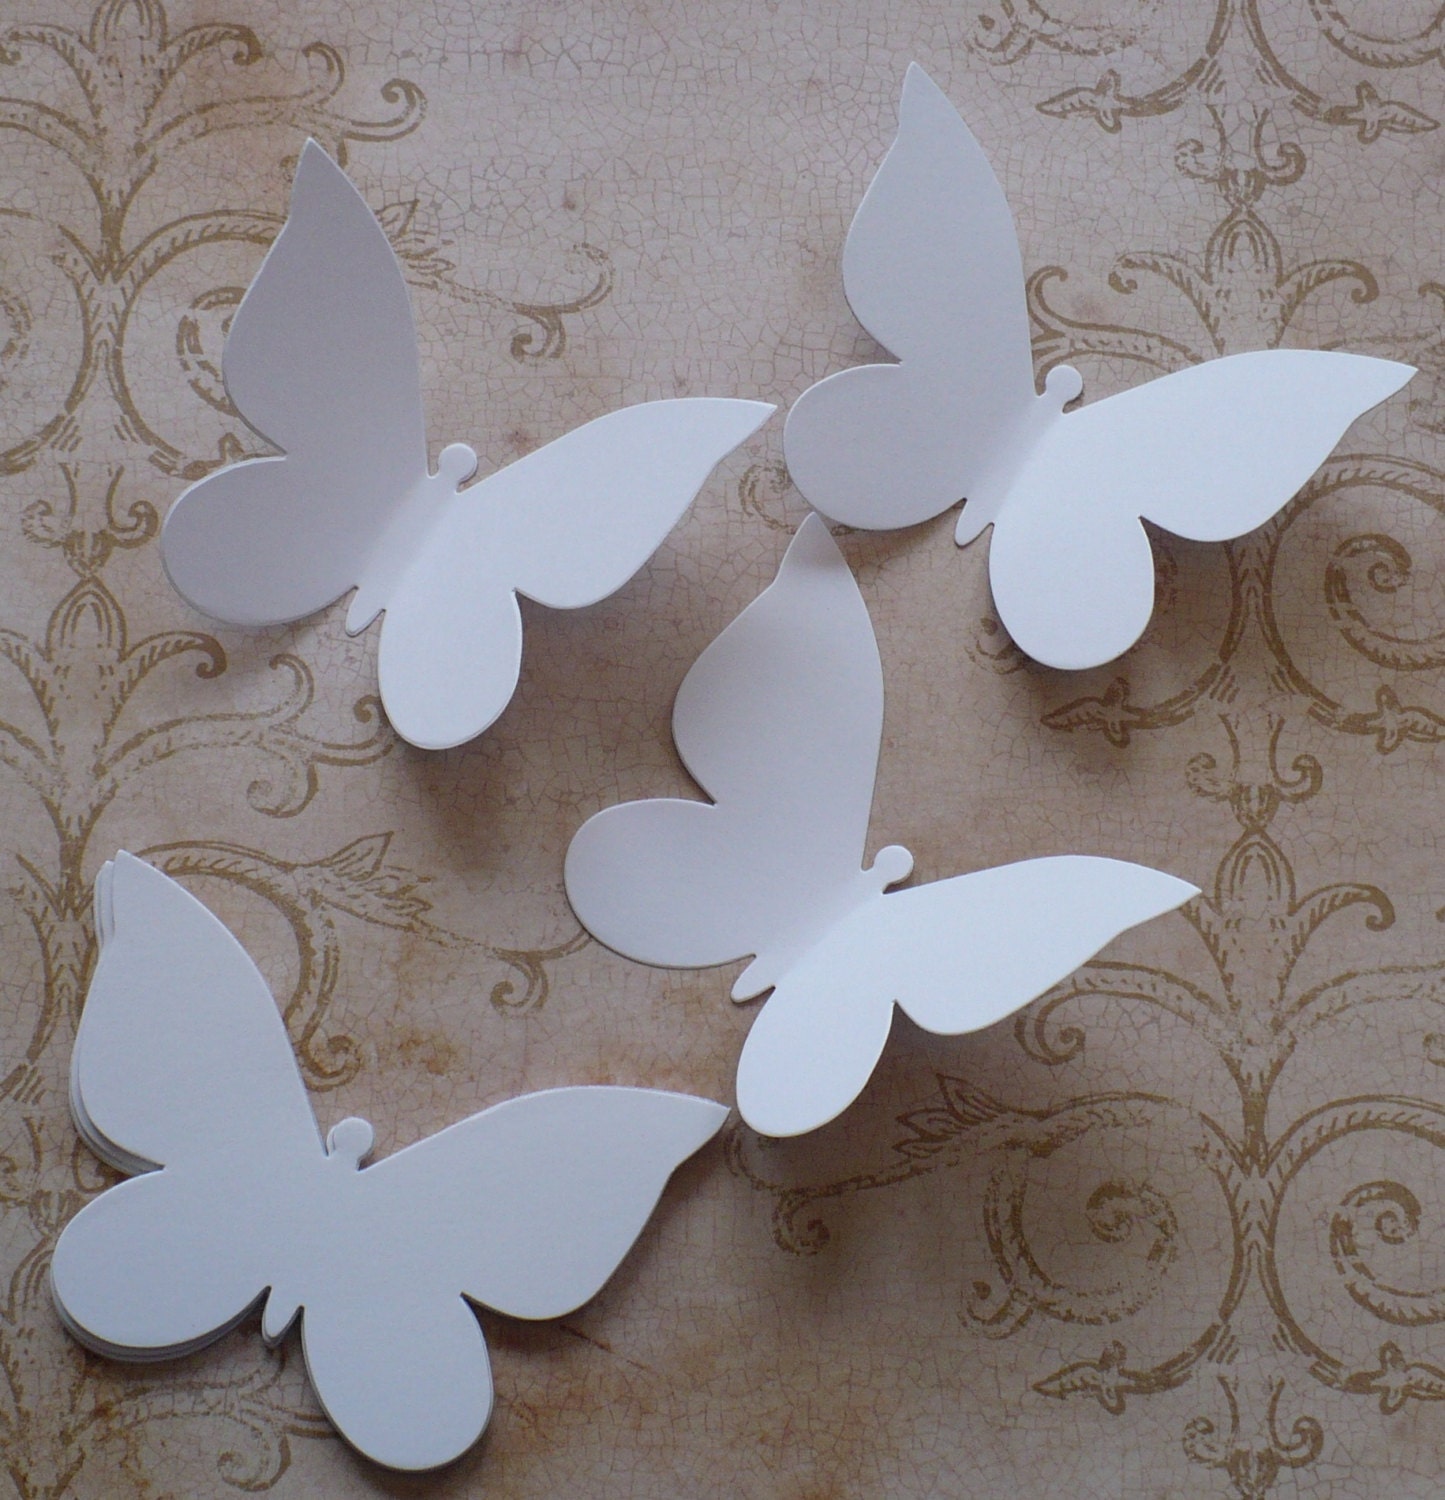 CARD TOPPERS WEDDING CONFETTI 25 EMBOSSED WHITE 3D BUTTERFLIES WITH PEARLS 